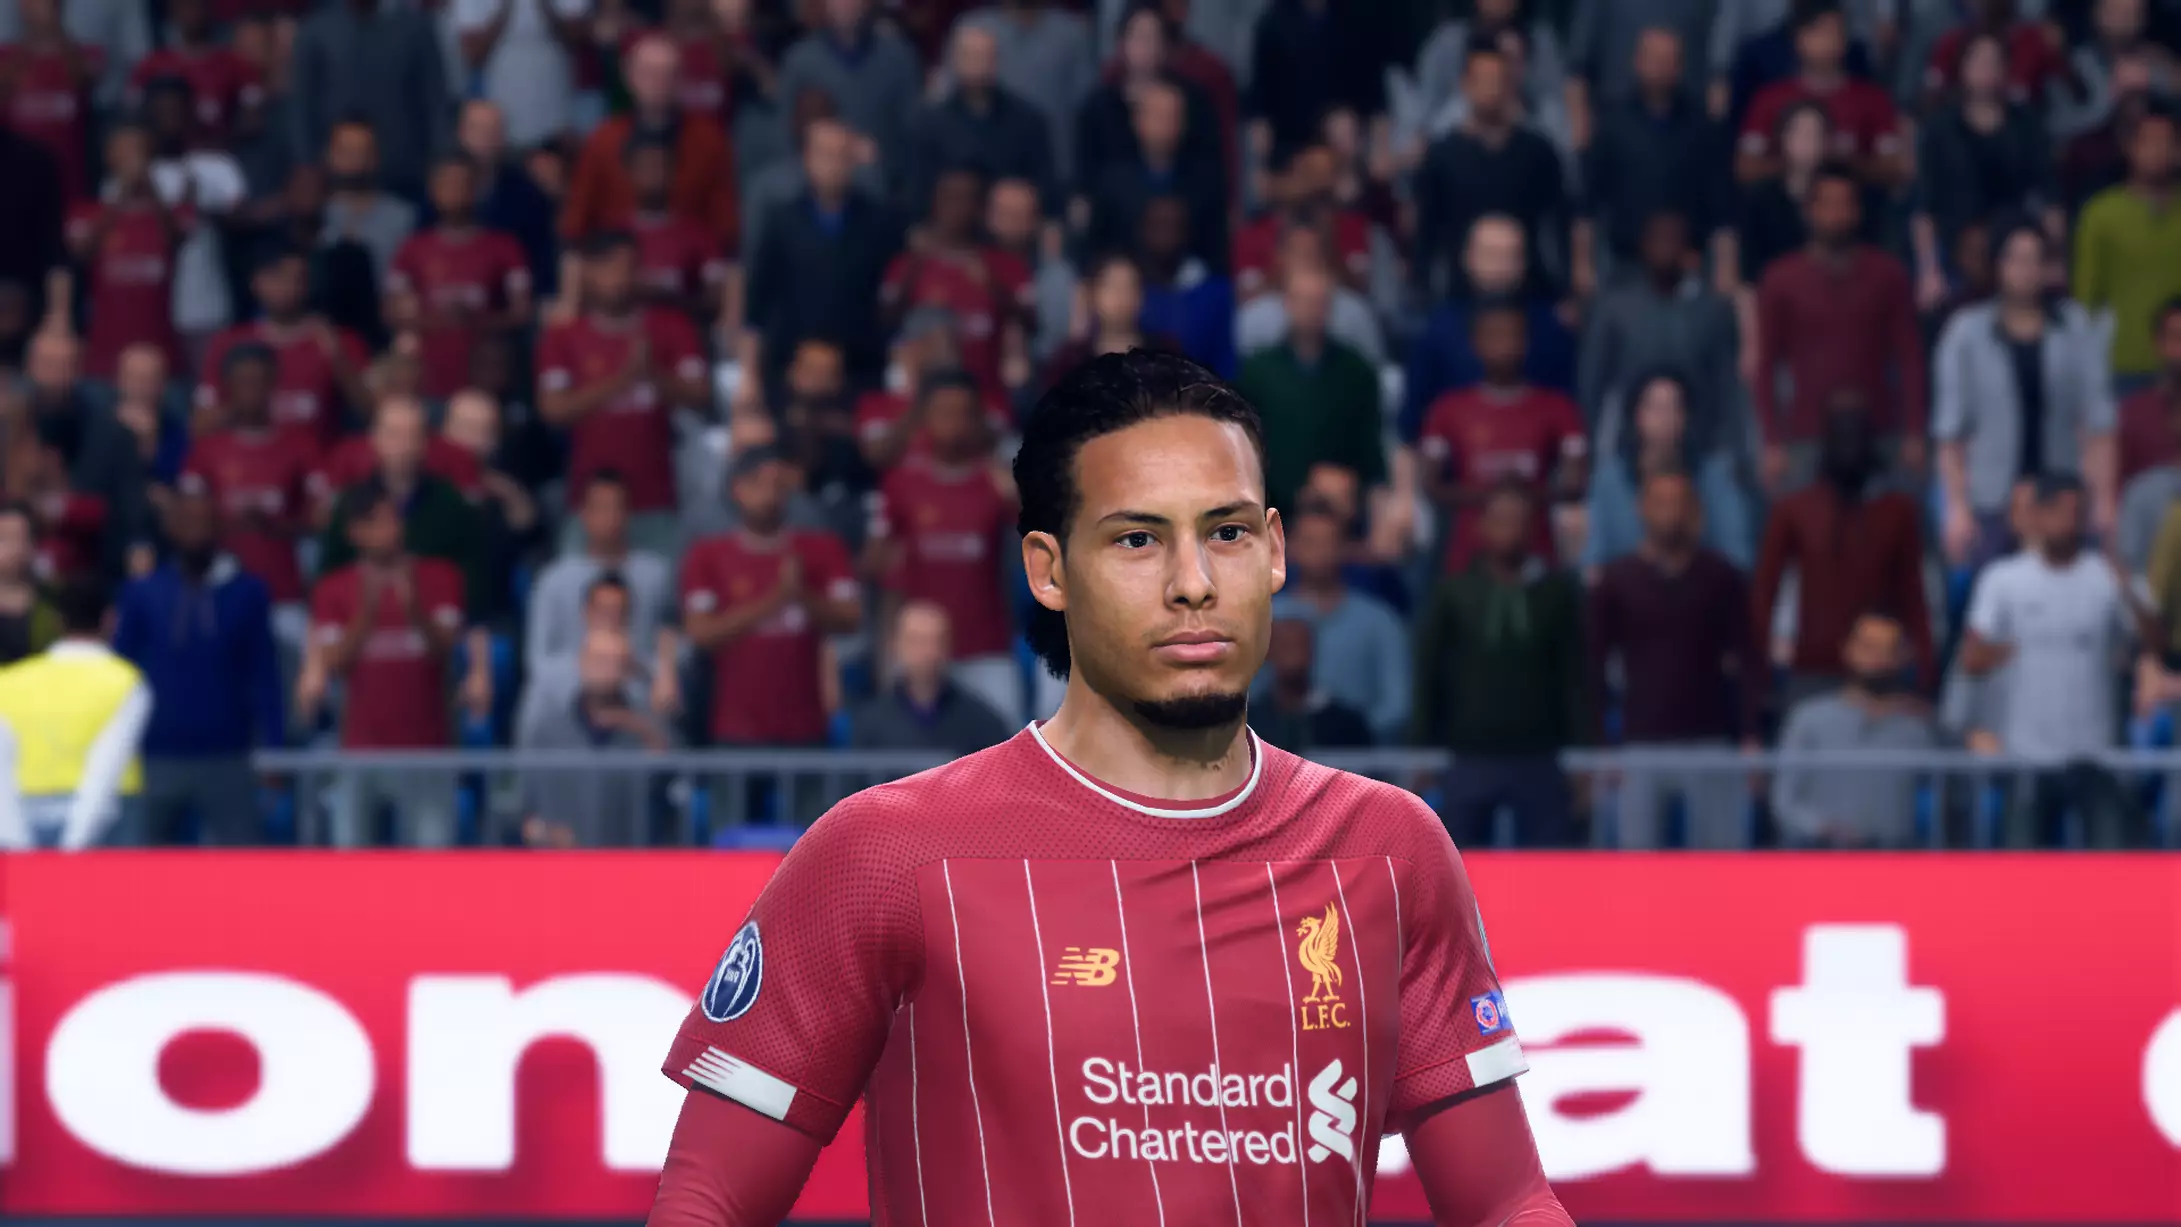 UEFA's number one, and potentially soon to be the world's number one, player. Image: EA Sports/Liverpool Echo